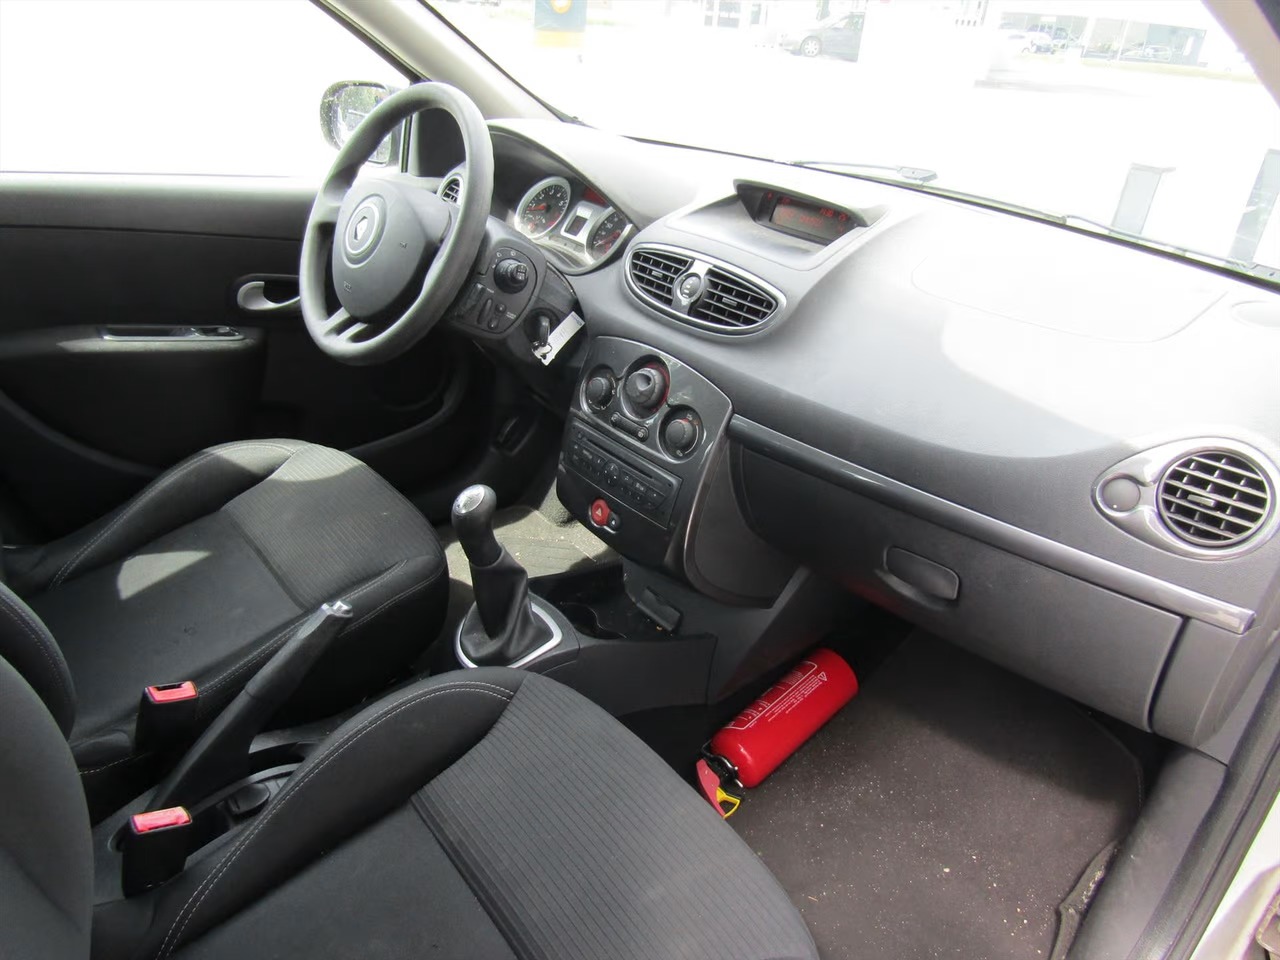 Renault Clio - 1.2 16V 75 ch 5D Airco collection